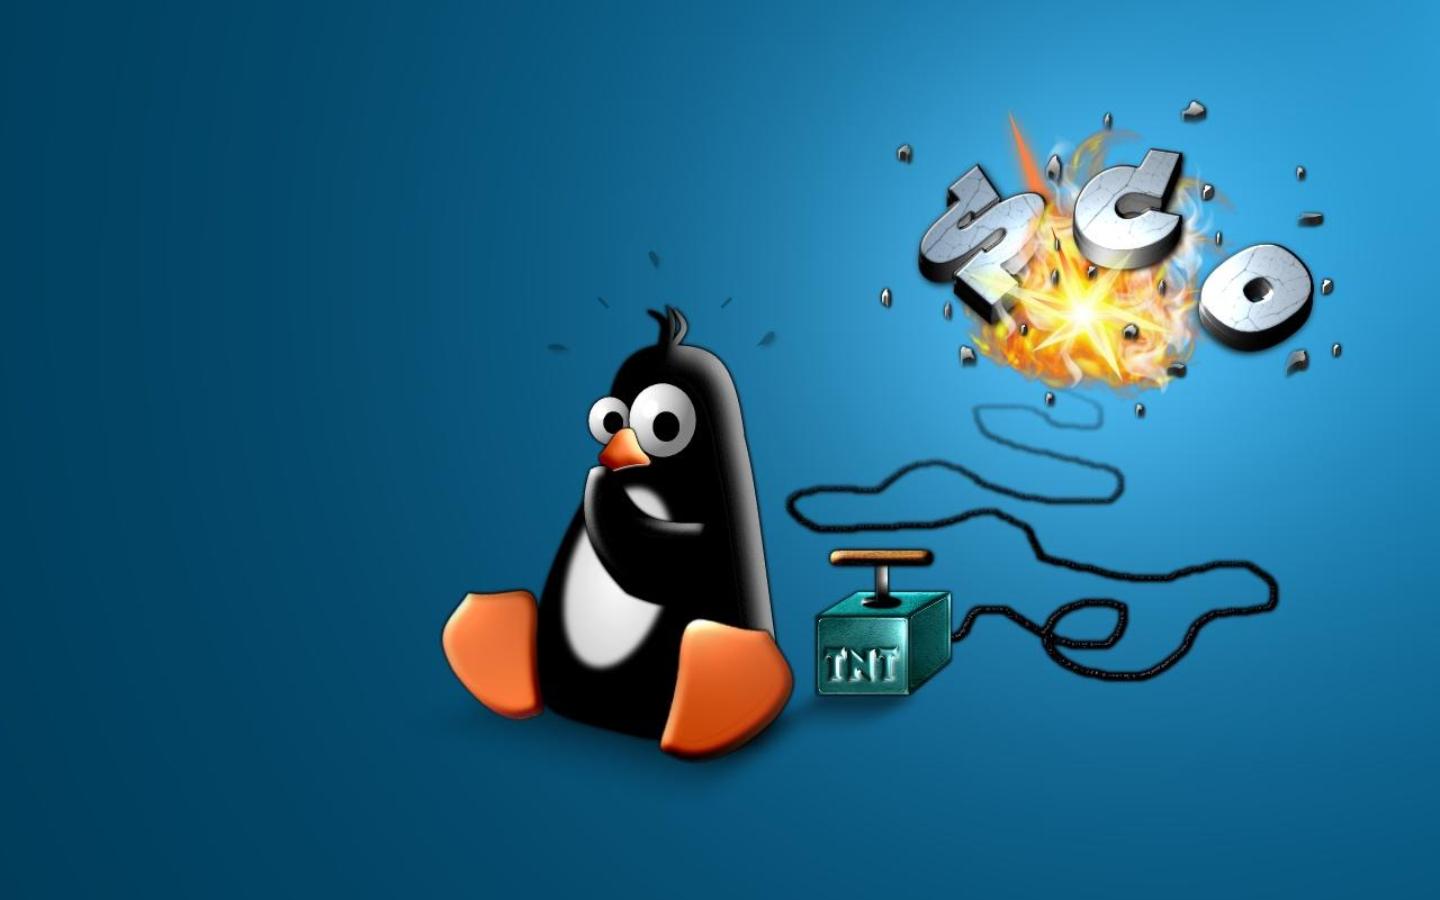 80+ Linux HD Wallpapers and Backgrounds